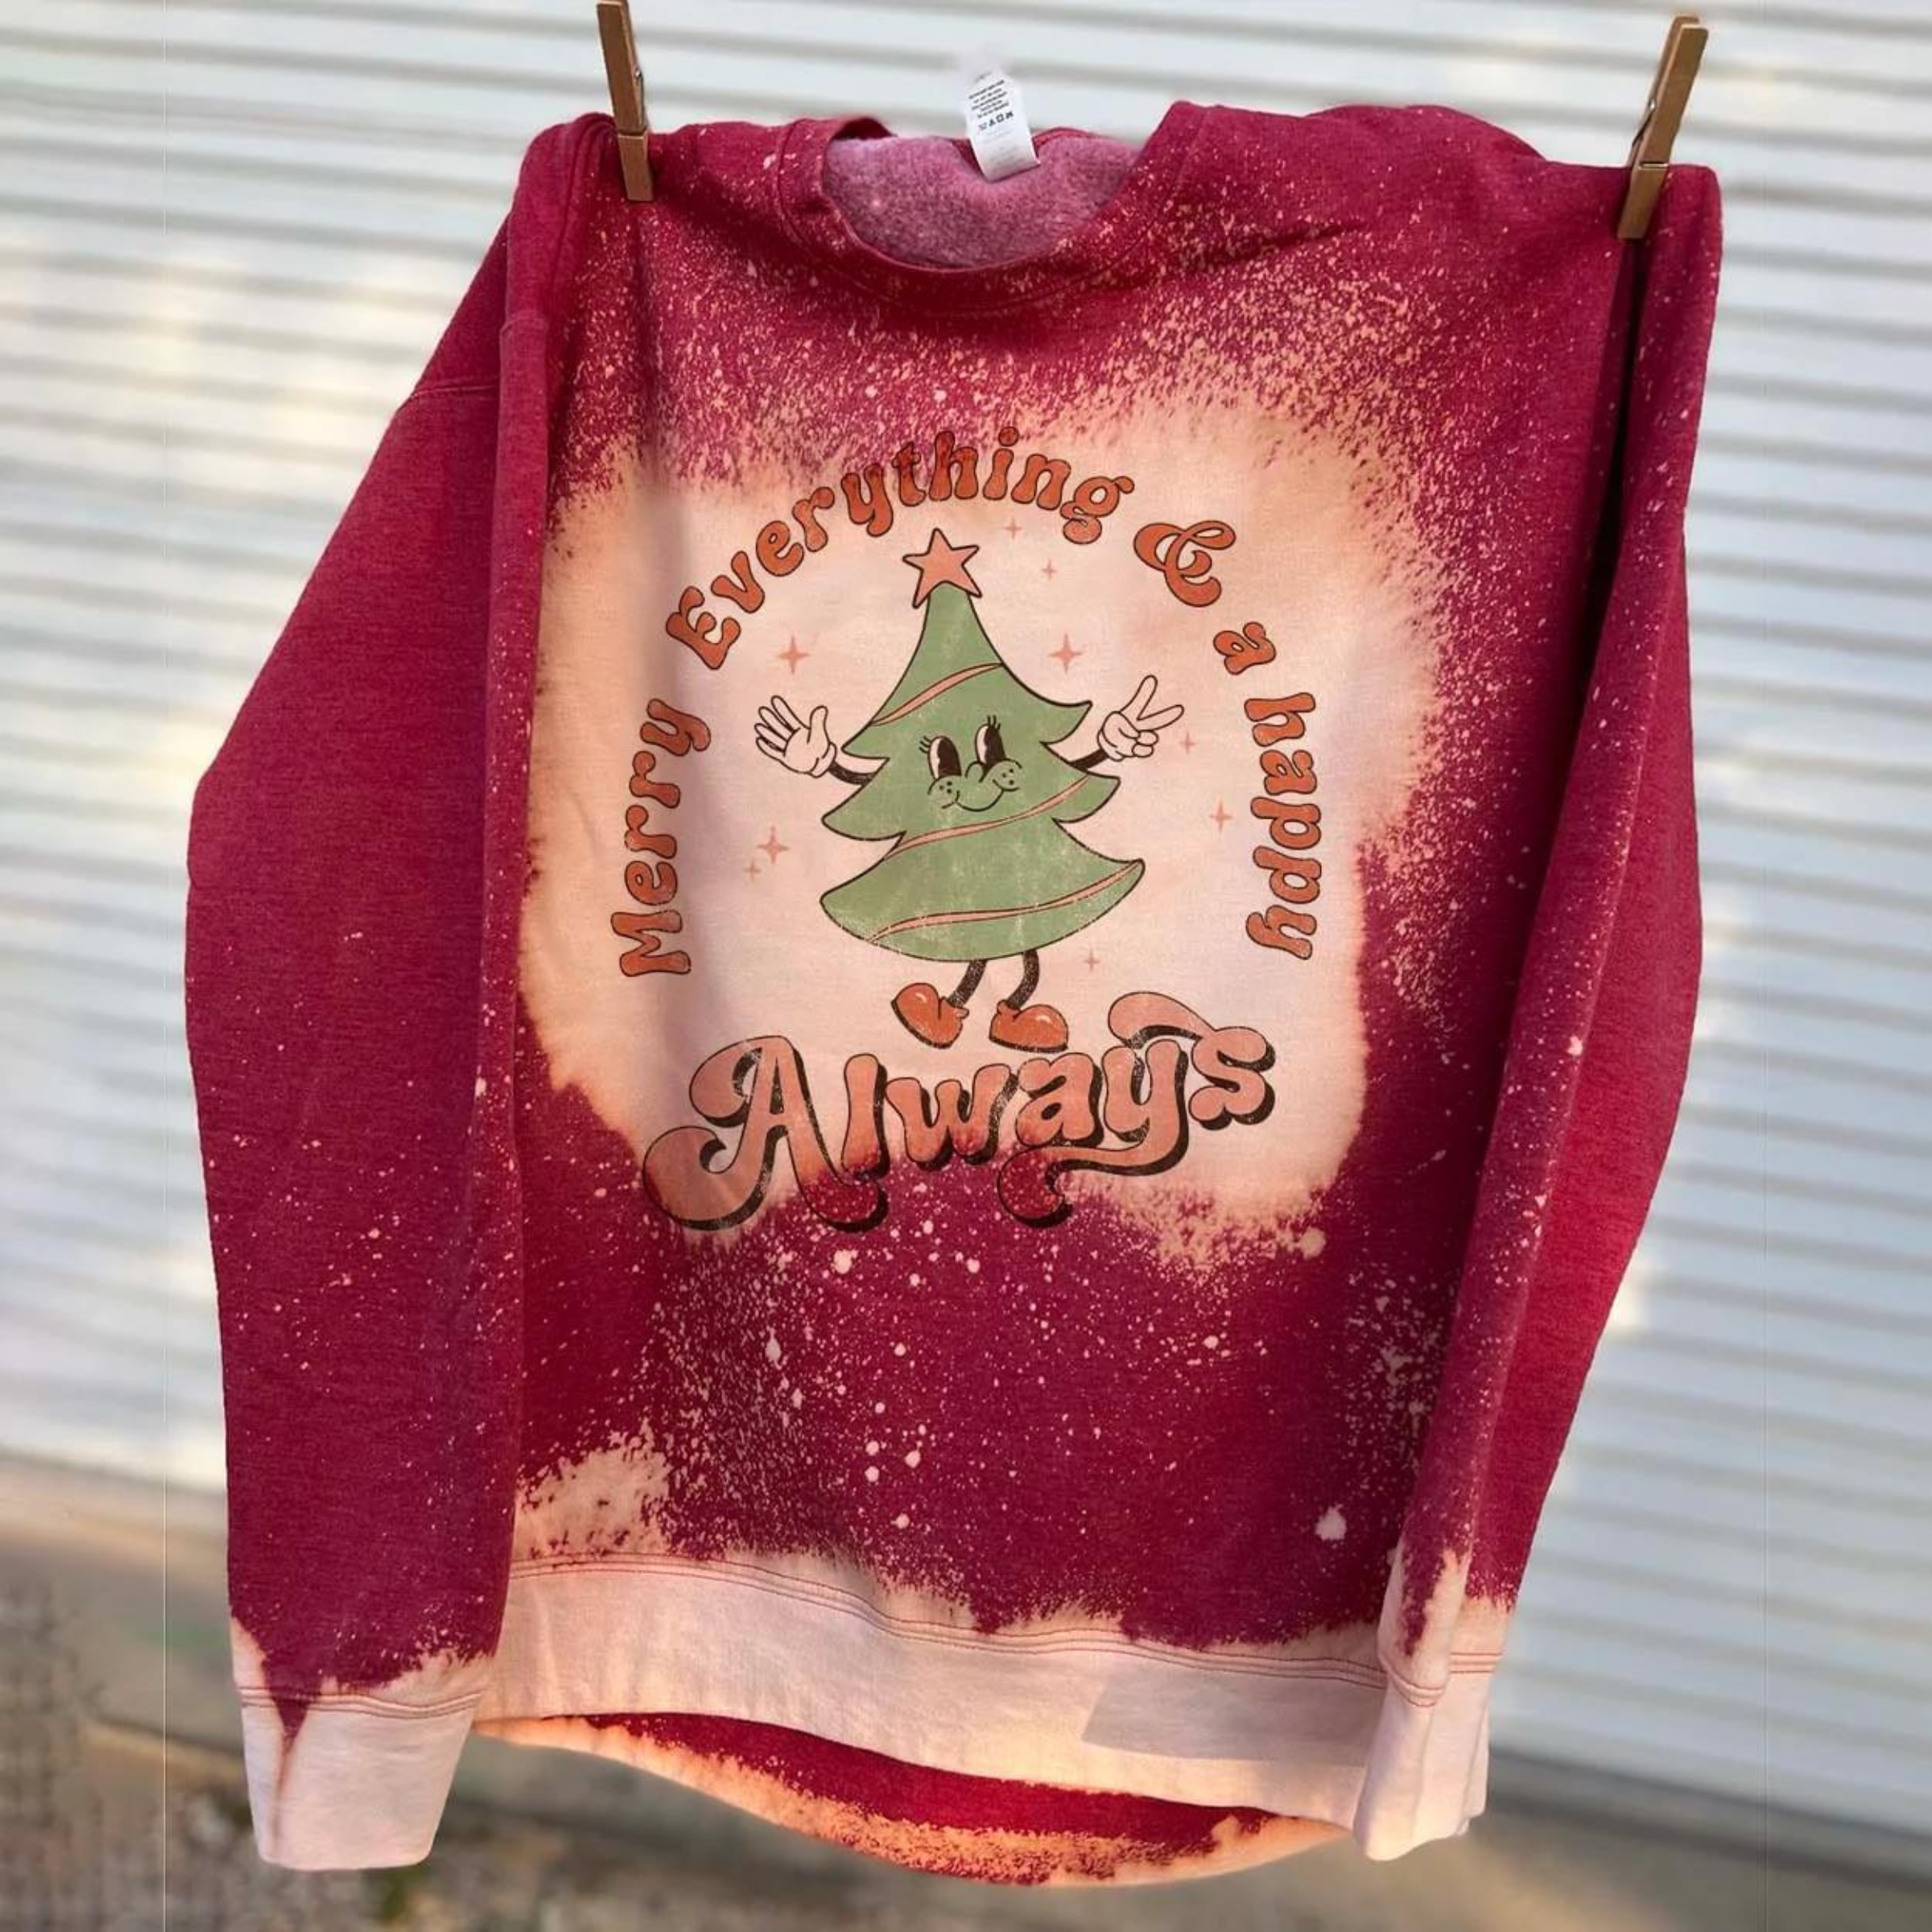 This bleached splatter graphic sweatshirt in red includes a crew neckline, long sleeves, and a graphic that says "Merry Everything & a happy Always" in a cute mix of fonts with a Christmas Tree throwing up the peace sign. This tee is shown hung from a line with clothespins. 